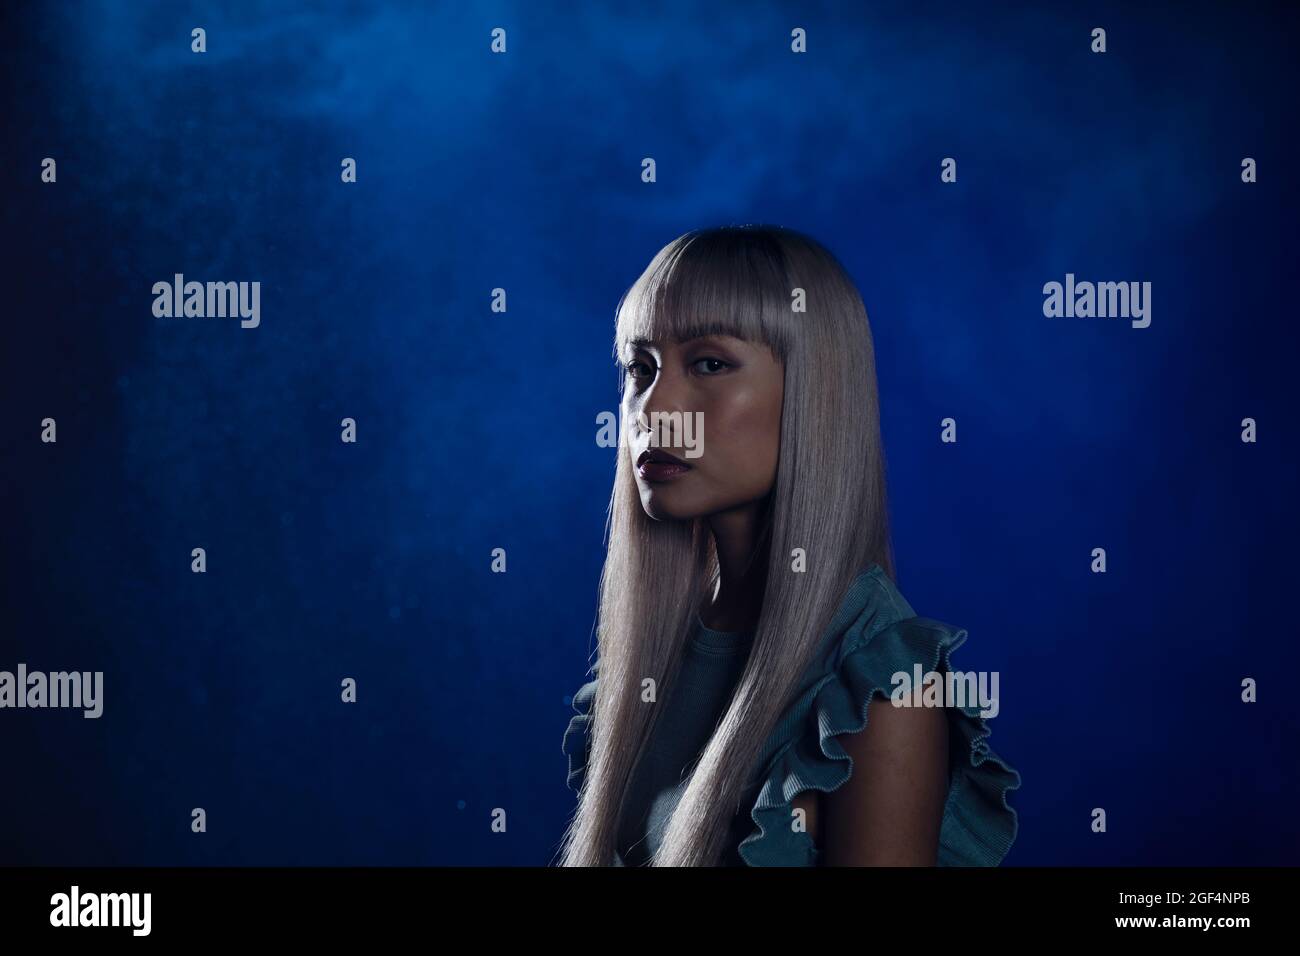 Woman with bangs staring against blue background Stock Photo